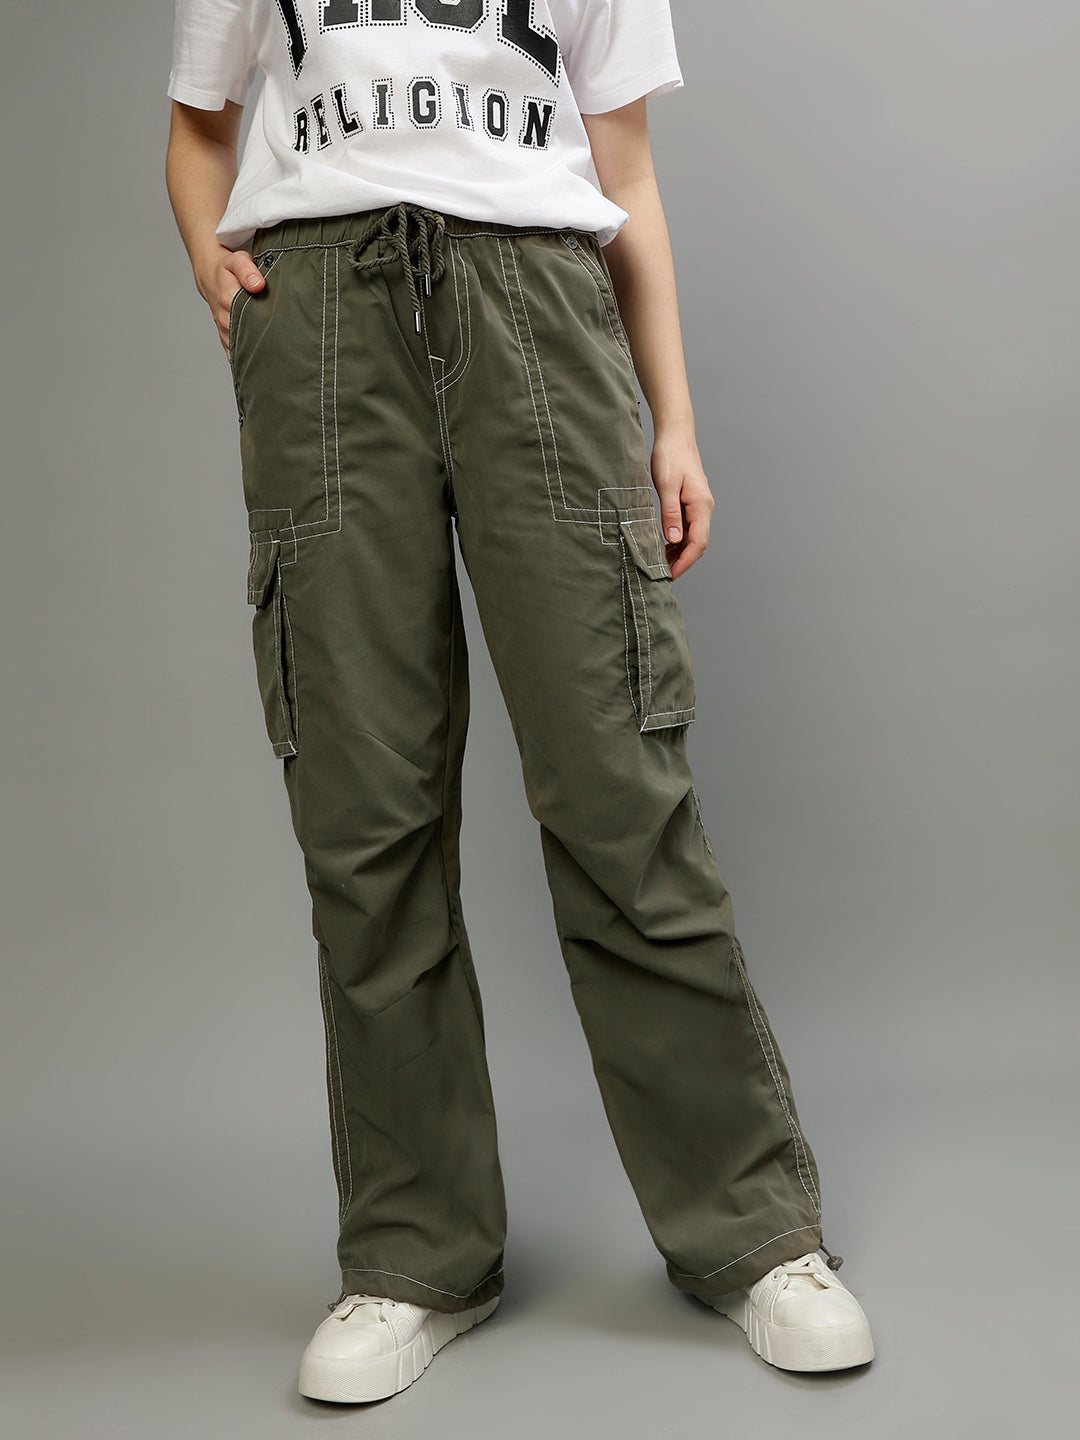 RD Style, Jia Cargo Pant